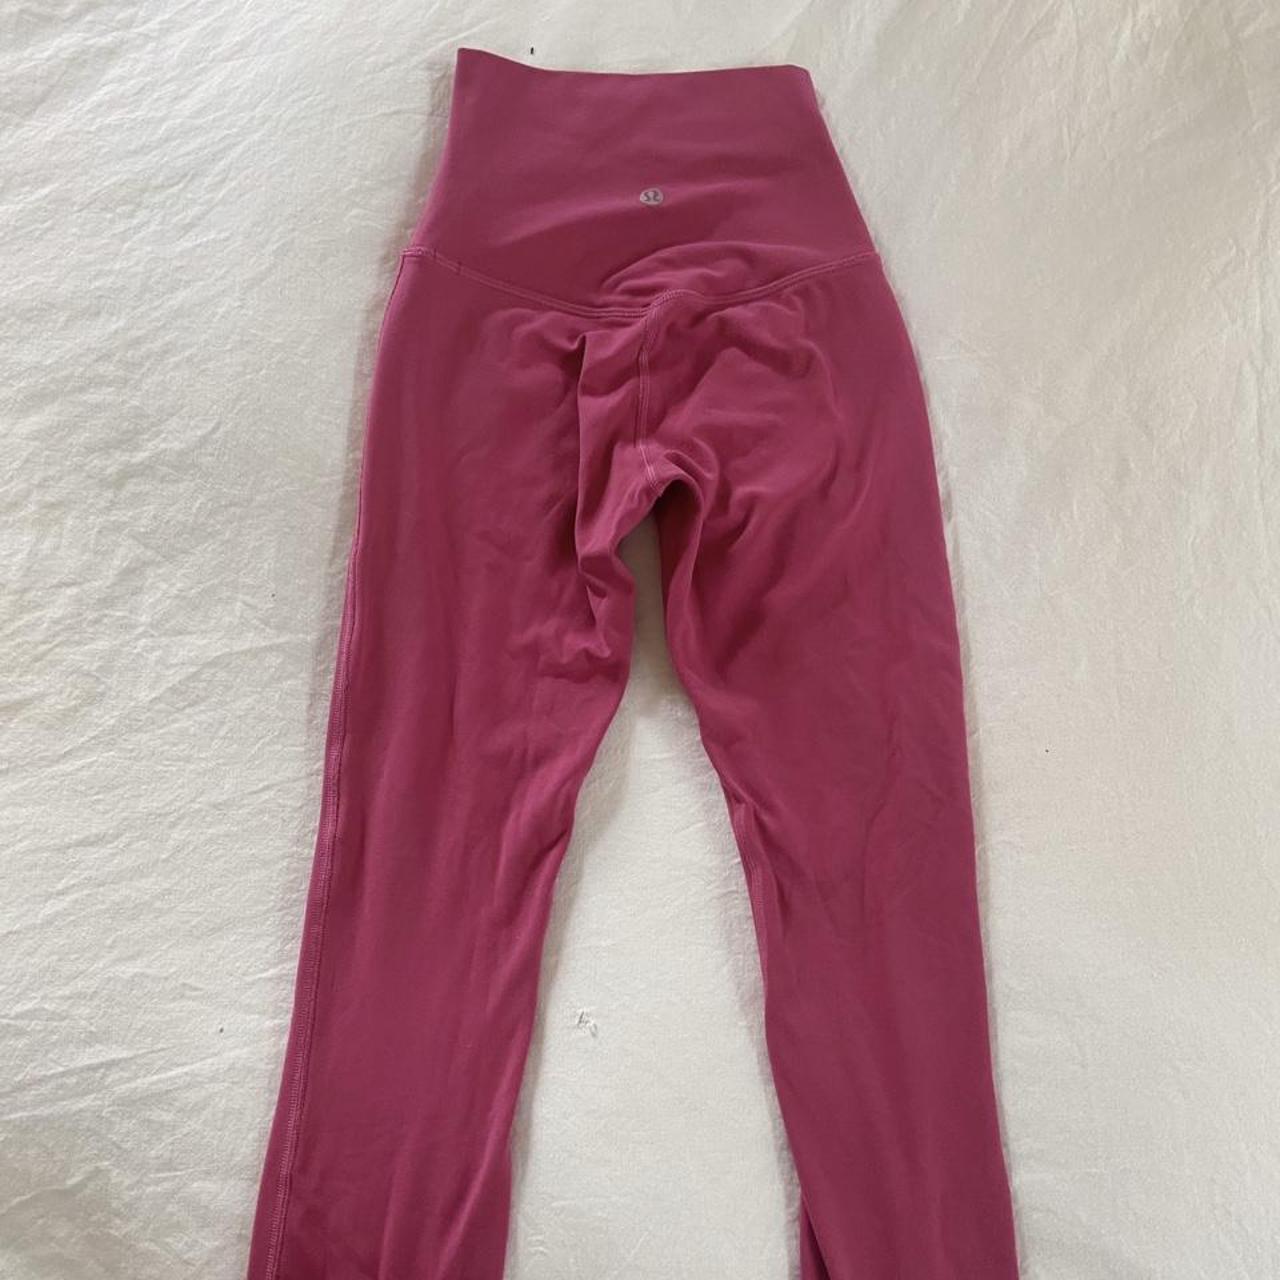 DO NOT USE PAYPAL pink lychee align leggings high... - Depop